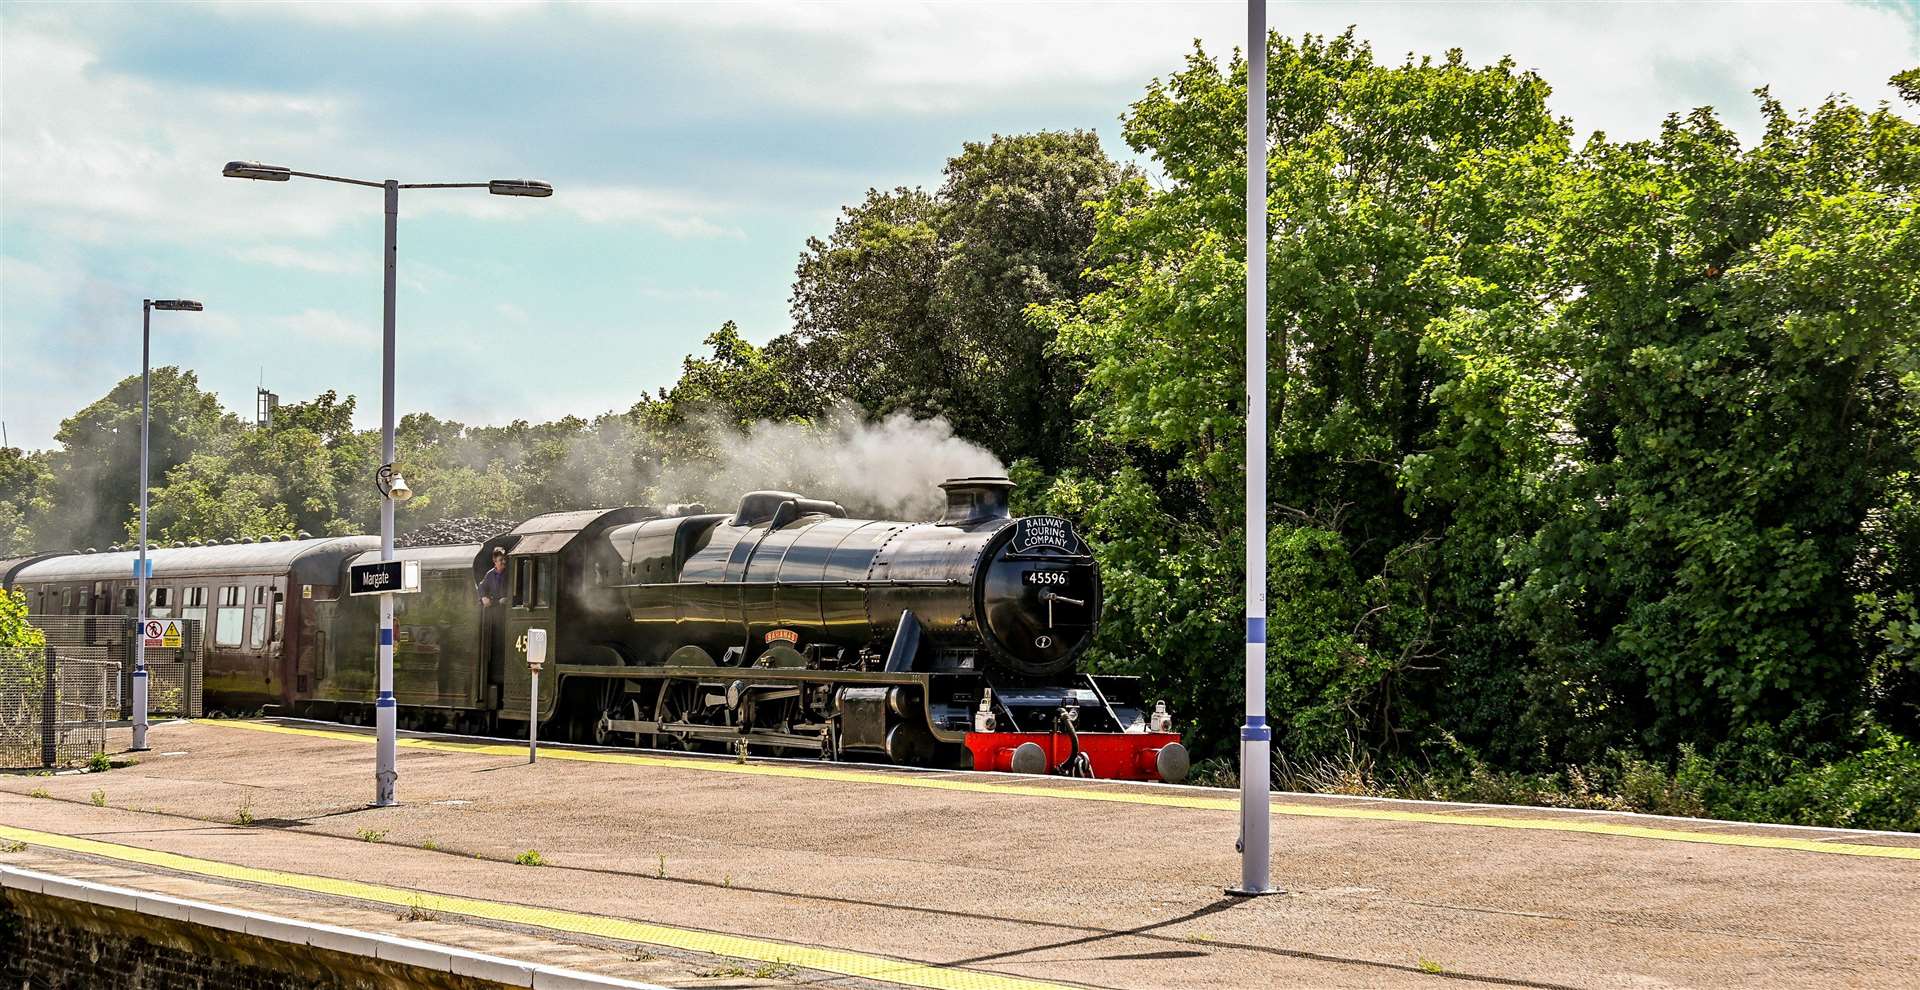 Adult tickets for the journey start from £99. Picture: Steven Collis